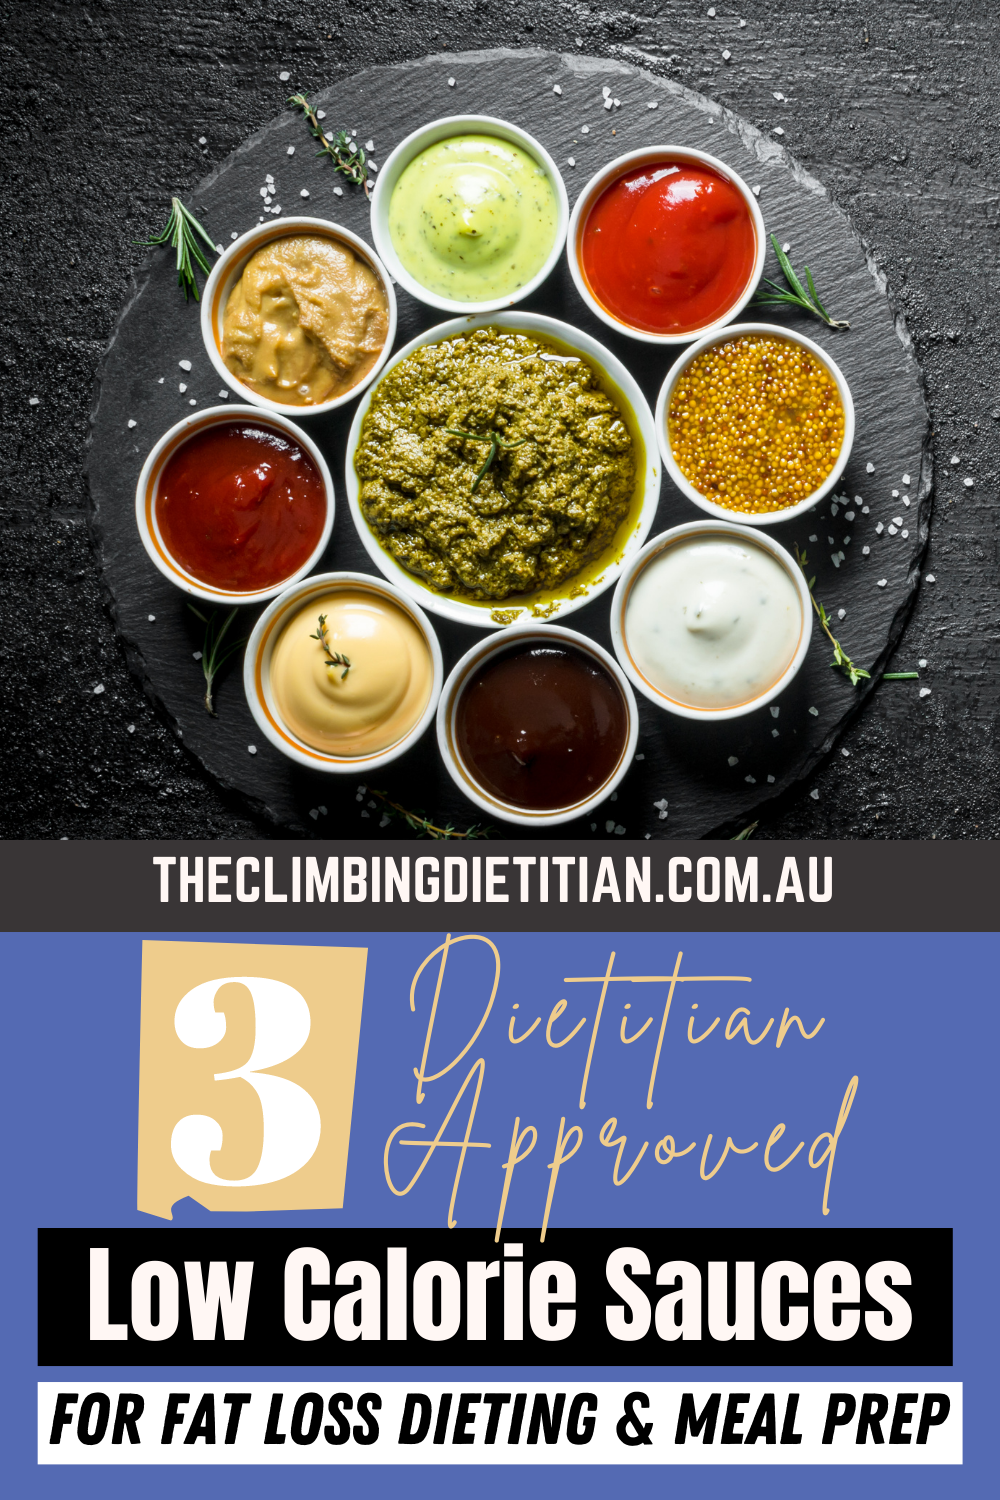 Dietitian-Approved-Low-Calorie-Sauces-for-Fat-Loss-Dieting-3-Recommendations-Revealed-Dietitian-Brisbane-Sports-Nutritionist